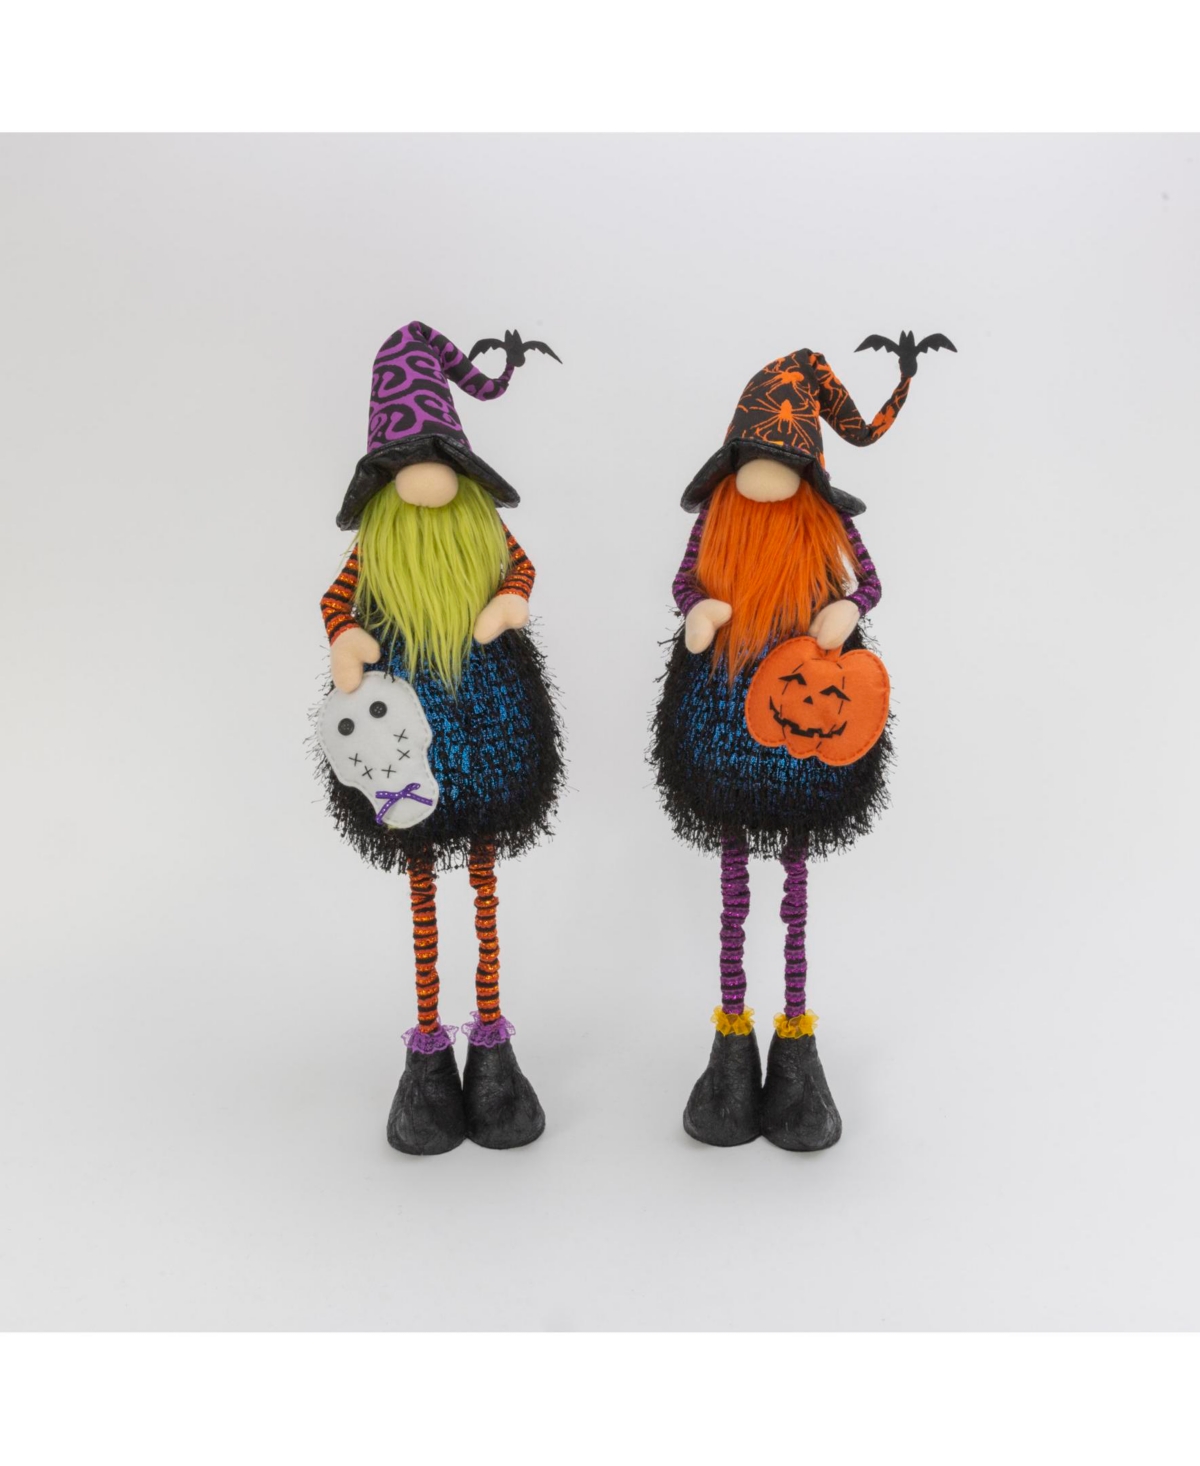 Set of 2 Lighted Whimsical Halloween Gnomes with Flexible Legs - Multicolor